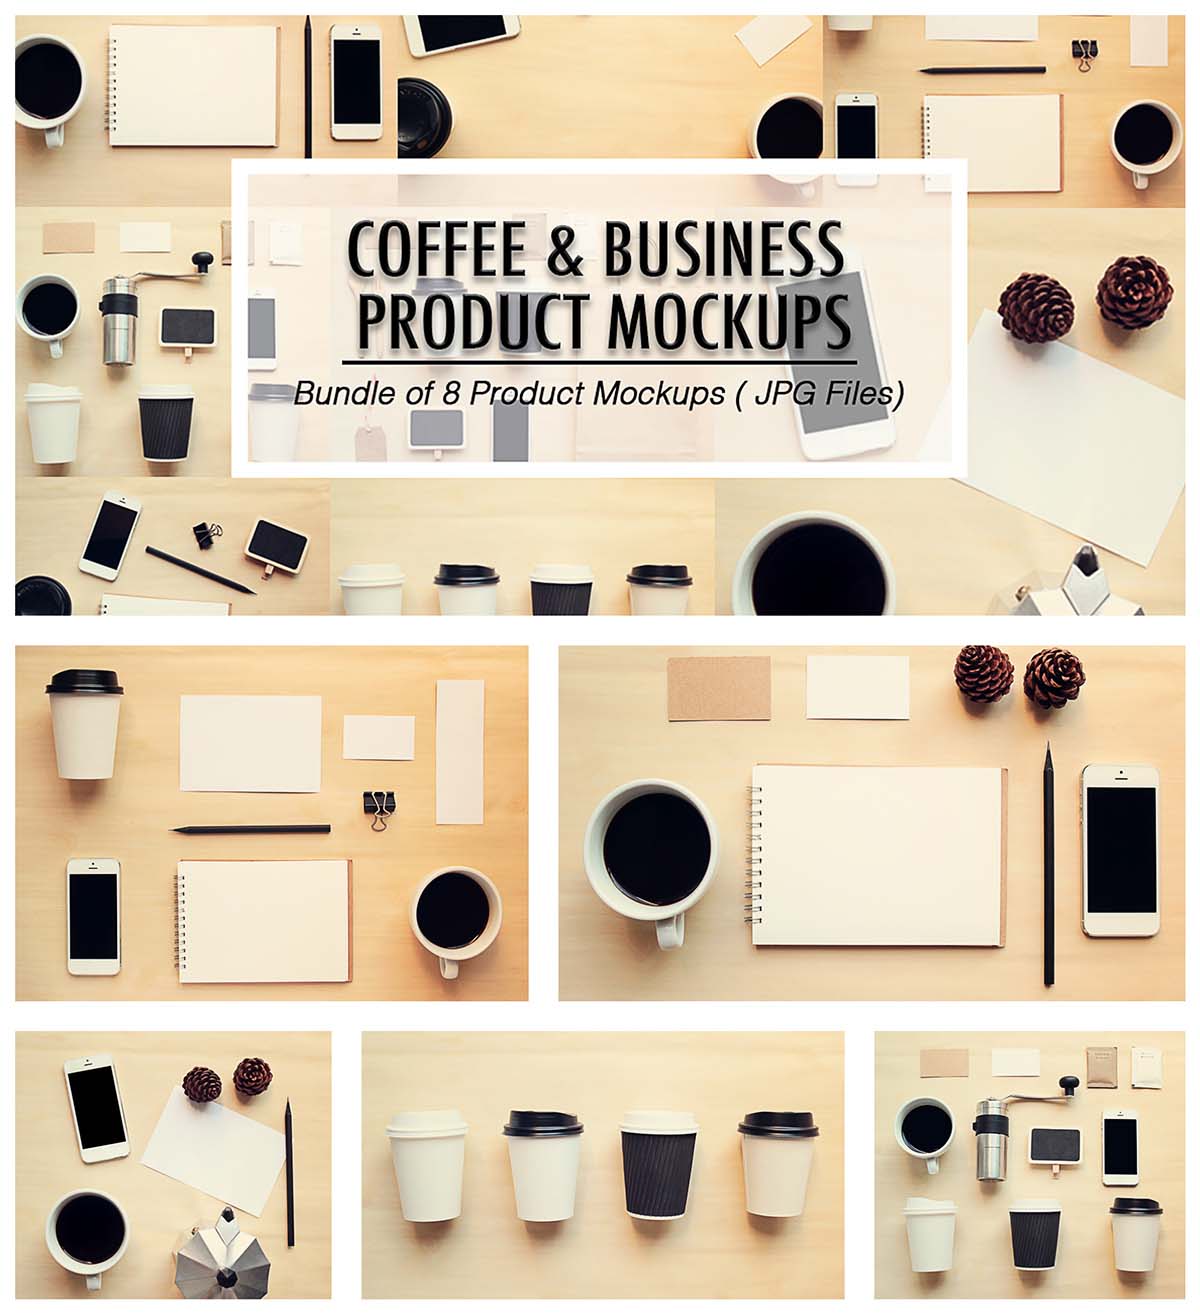 Coffee and business mockup branding product